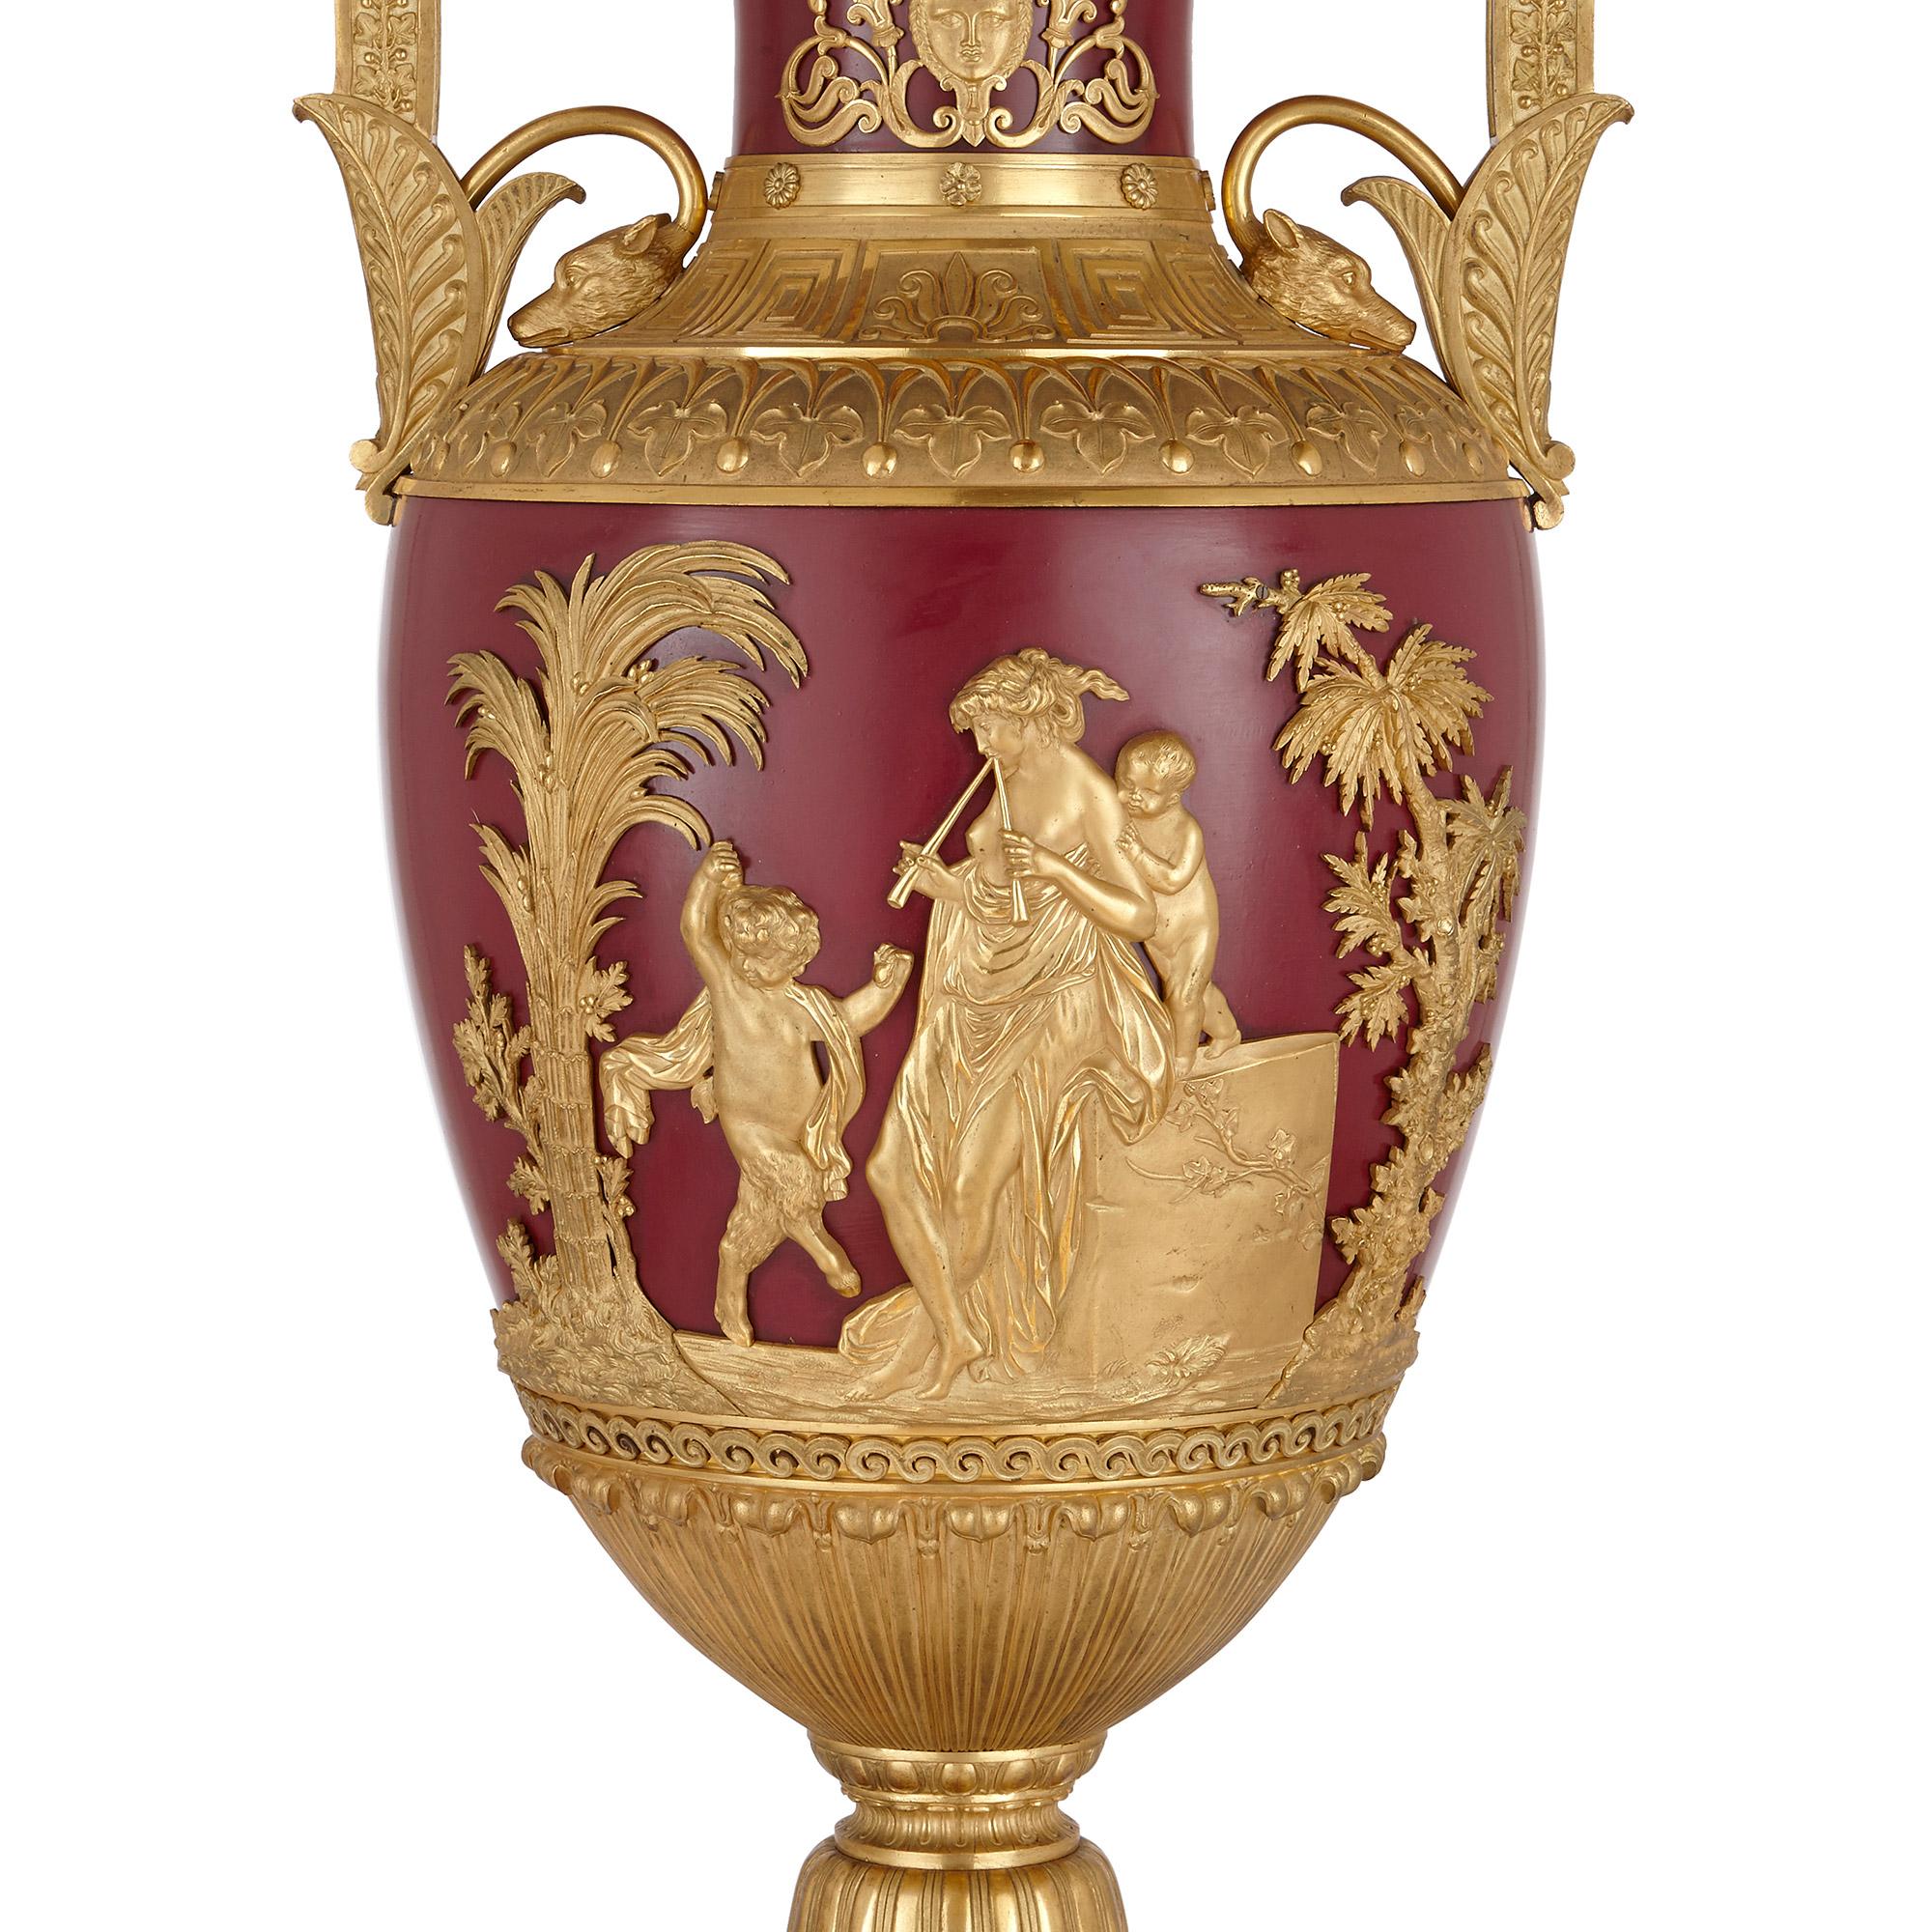 Pair of important Russian gilt bronze and metal vases
Russian, circa 1820
Dimensions: Height 98cm, width 43cm, depth 38cm

This monumental pair of vases are exquisitely crafted in gilt bronze and metal. They both feature twin scrolled handles,